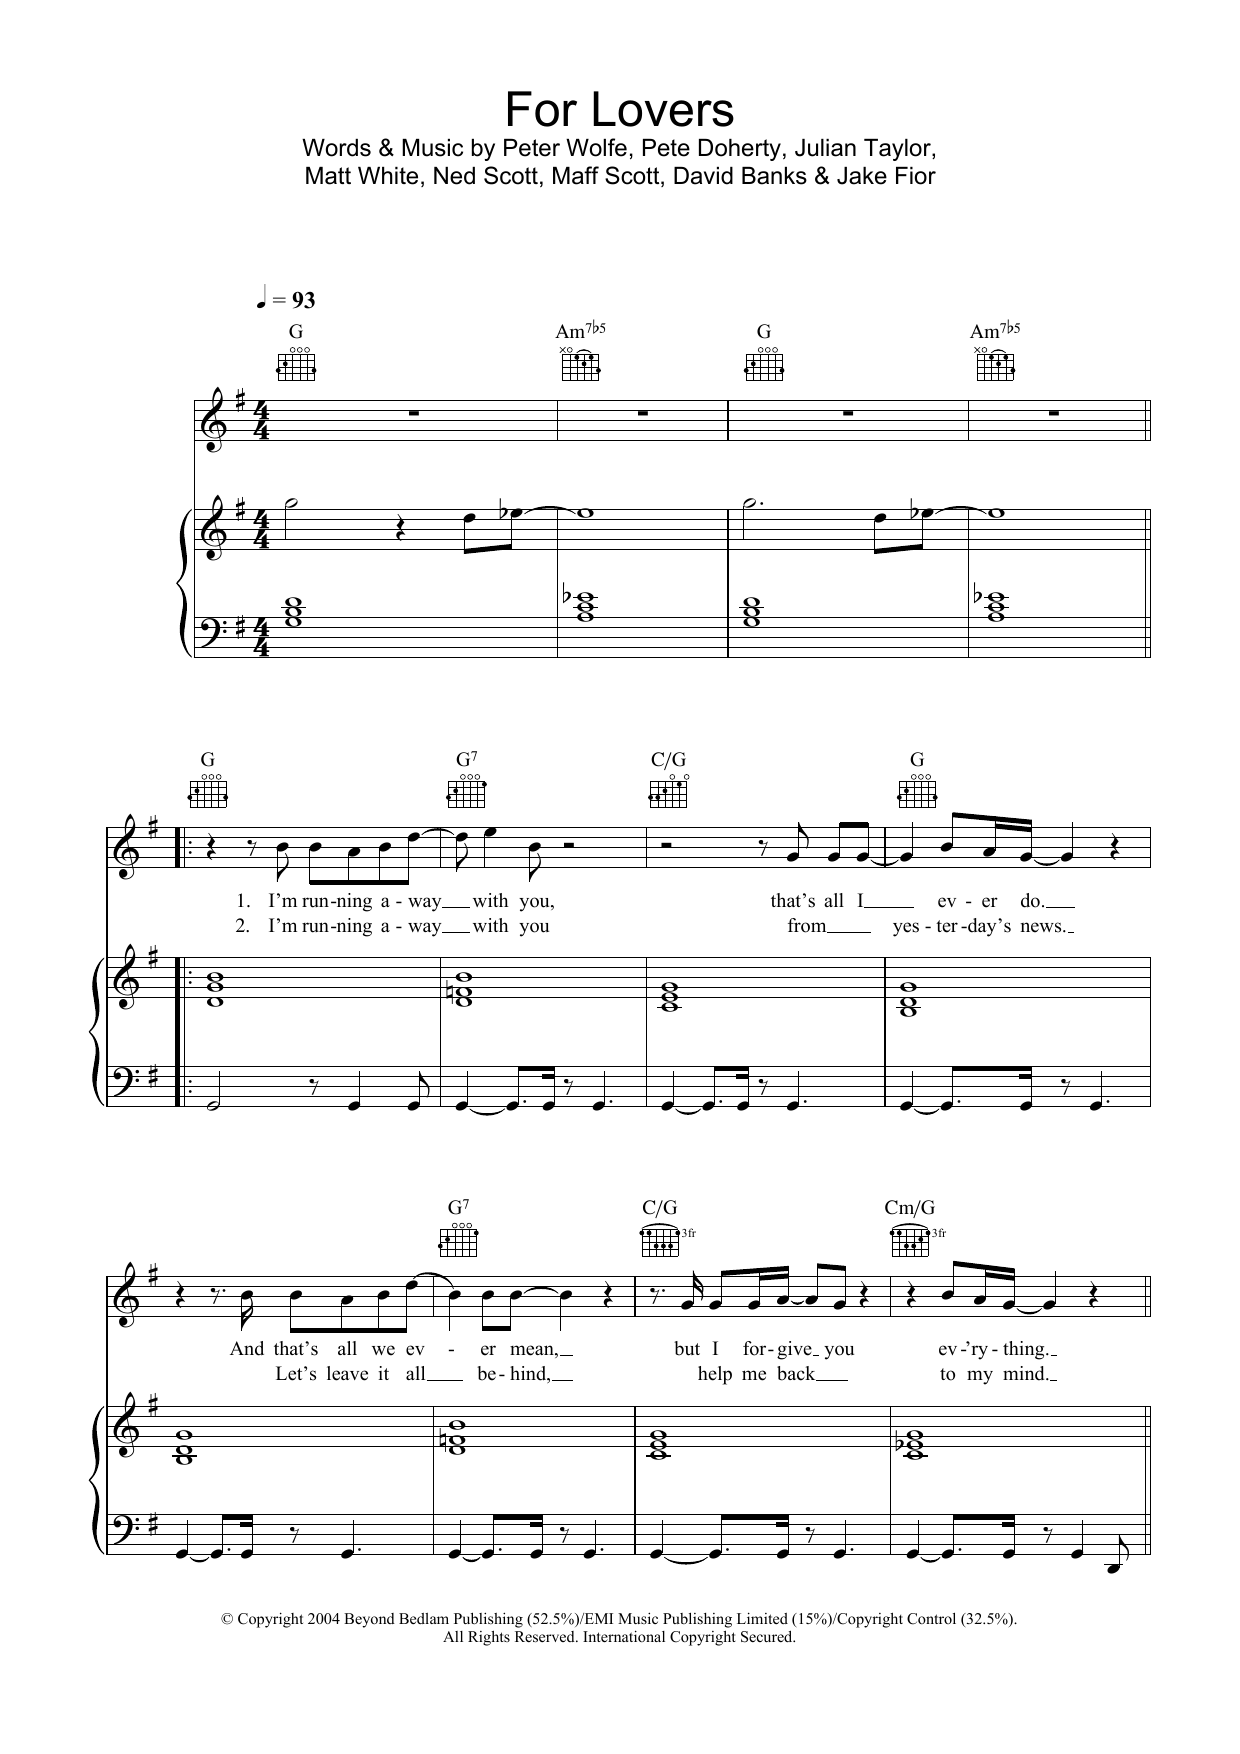 Wolfman For Lovers (feat. Pete Doherty) sheet music notes and chords. Download Printable PDF.